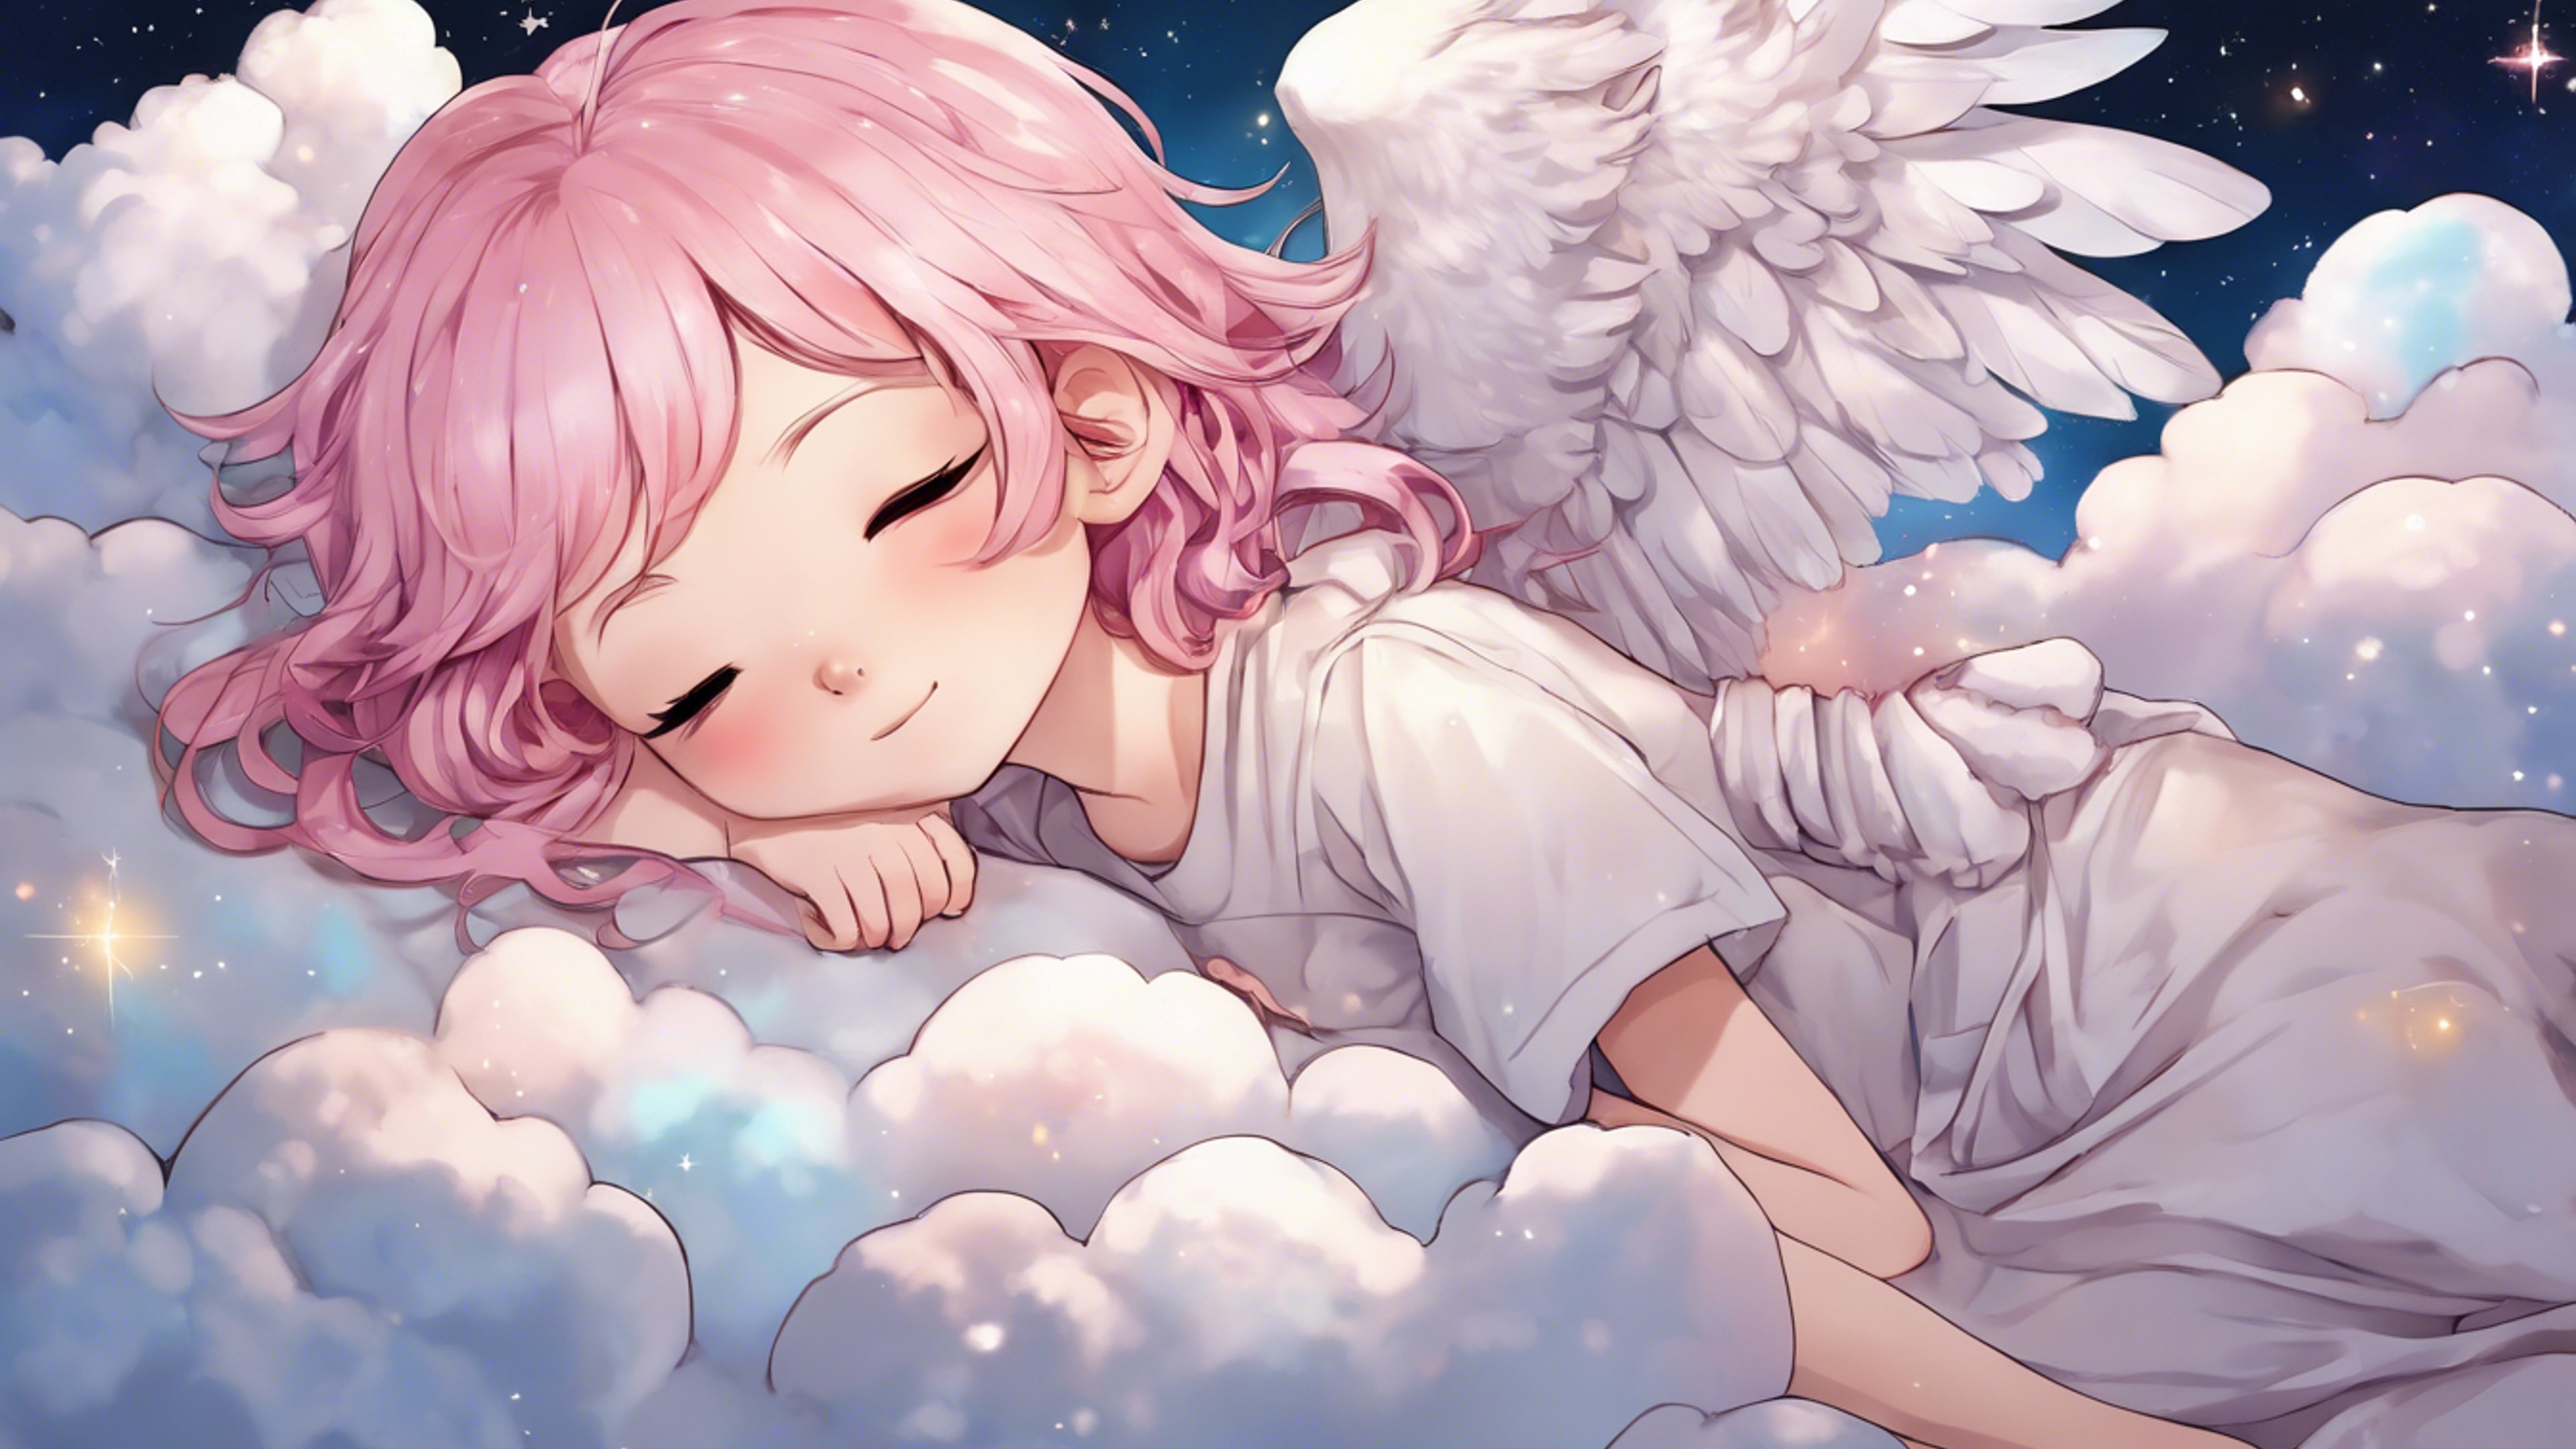 A chibi-style anime girl with pastel pink hair and angel wings, sleeping peacefully on a fluffy cloud under a starry night sky. Обои[4a6f35b80bd74bd2872d]